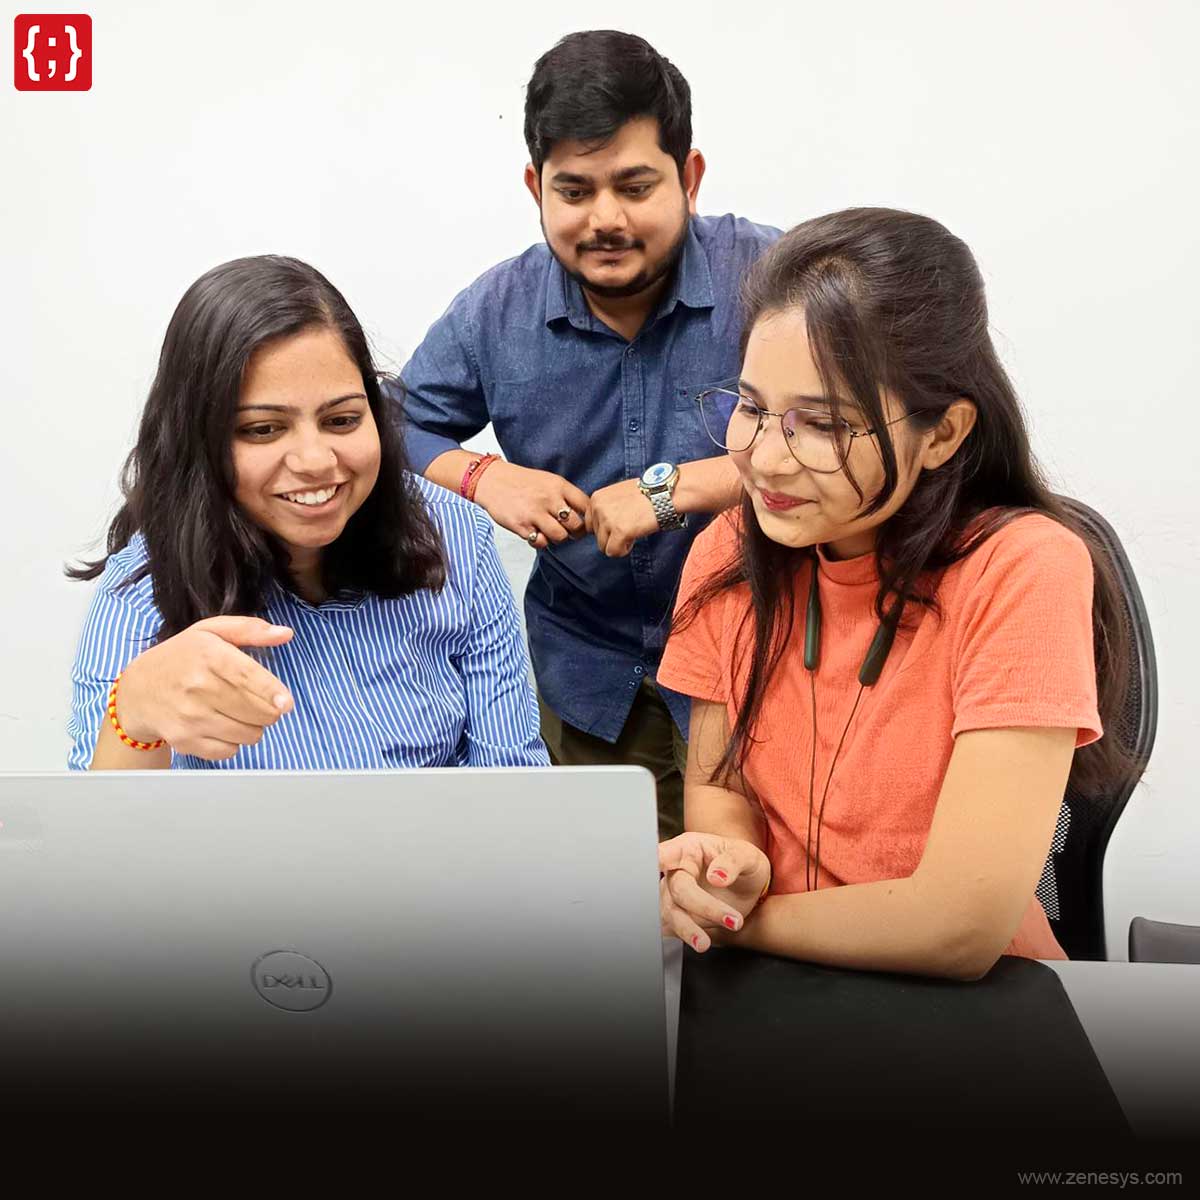 Ready to ditch the blues and be part of the buzz? Join our vibrant work environment and experience the mid-week hustle in a whole new way. Apply now and become a Zenesys team member! #ApplyNow #HiringAlert #WeareHiring #Zenesys #WorkCulture #ITHirings